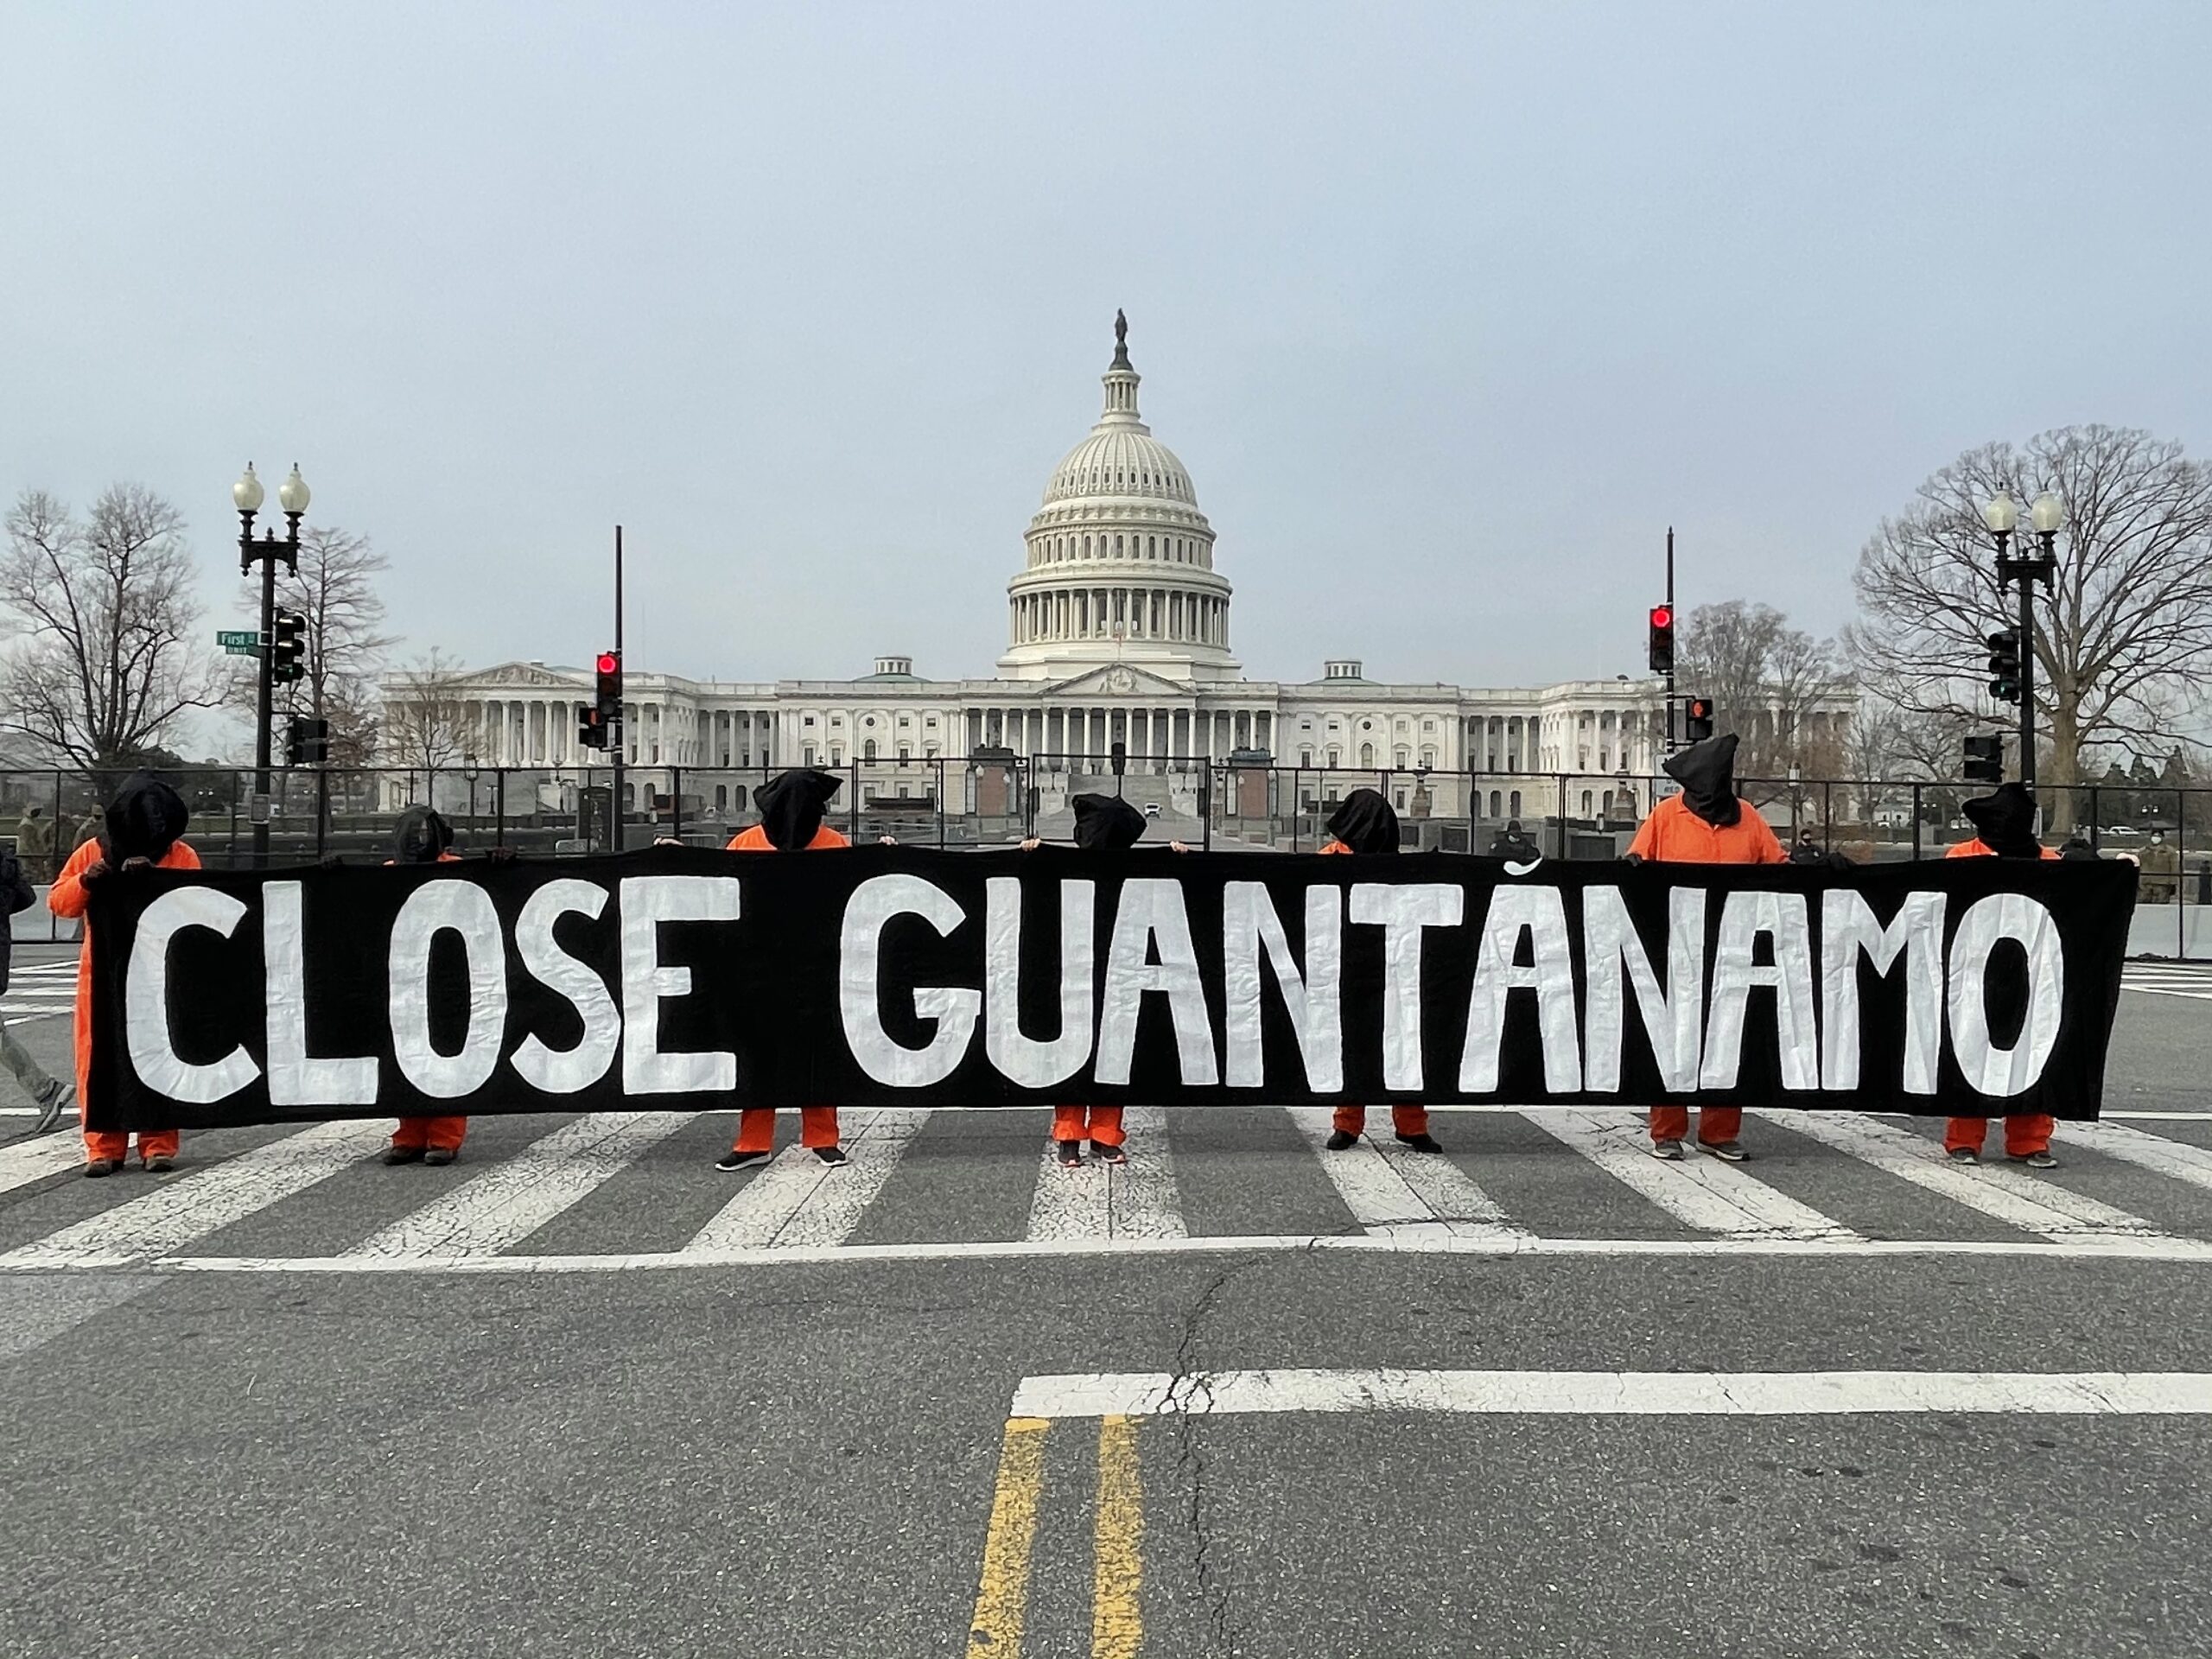 20 Years Later, US Government Continues to Perpetuate Grave Human Rights Abuses at Guantánamo Prison